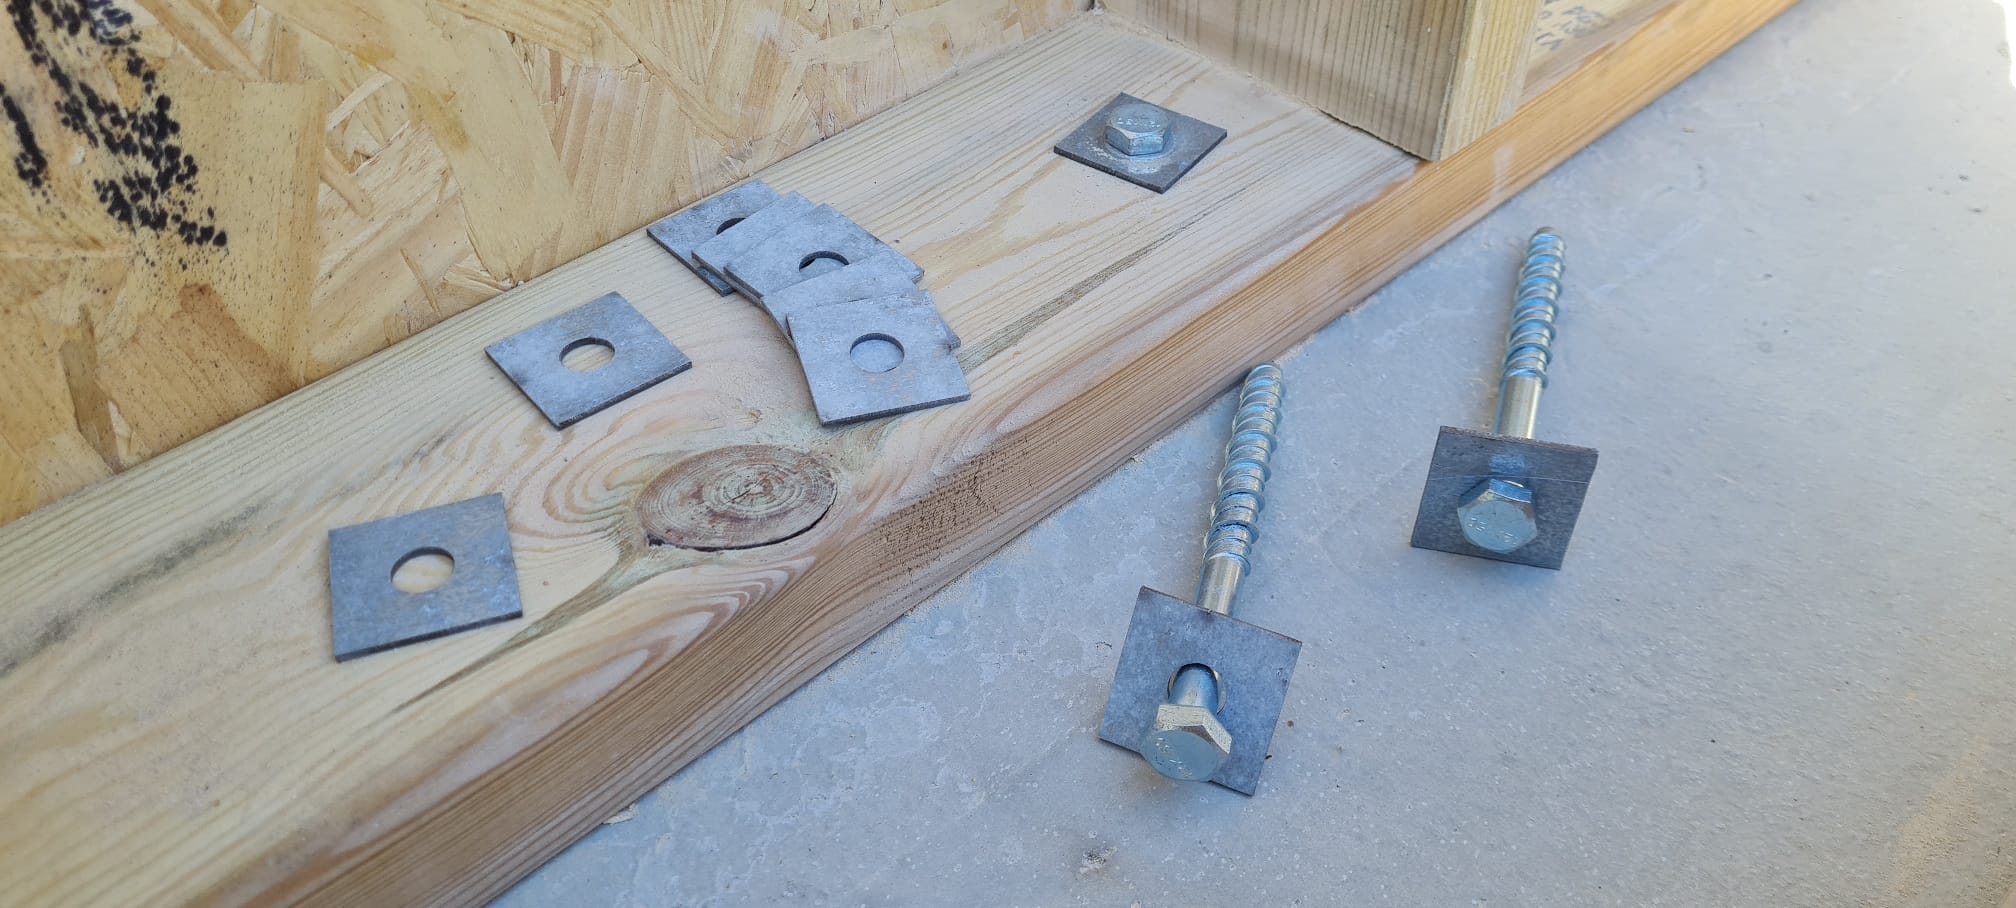 Square Washer on a Bolt being used for Building a House Extension